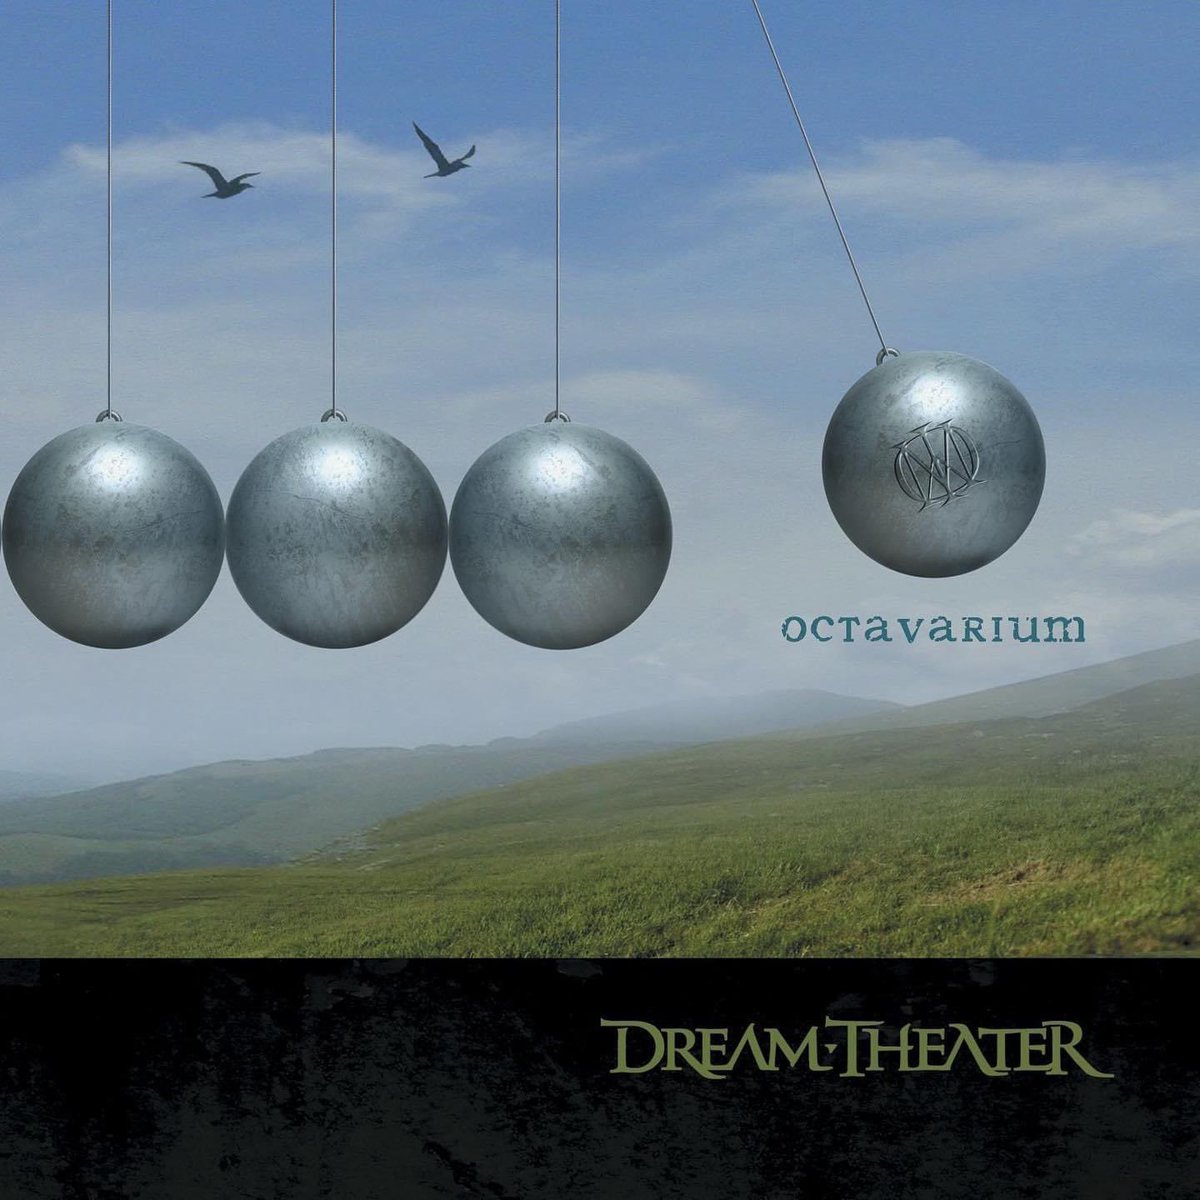 June 7th 2005 #DreamTheater released the album 'Octavarium' #NeverEnough #TheAnswerLiesWithin #PanicAttack #ProgressiveMetal

Did you know...
The album reached number 36 on the #BillboardCharts